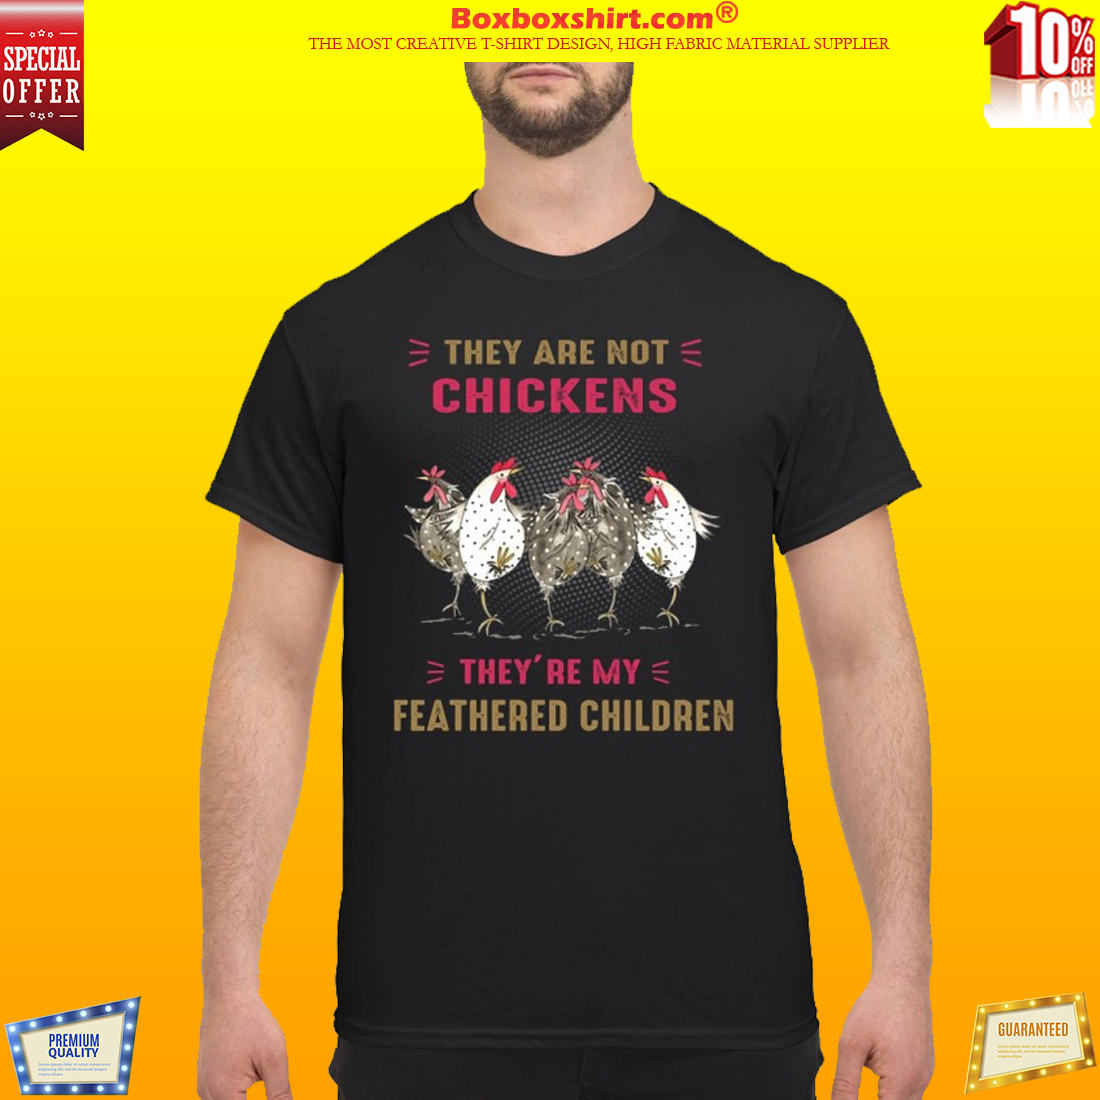 They are not chickens my feathered children classic shirt